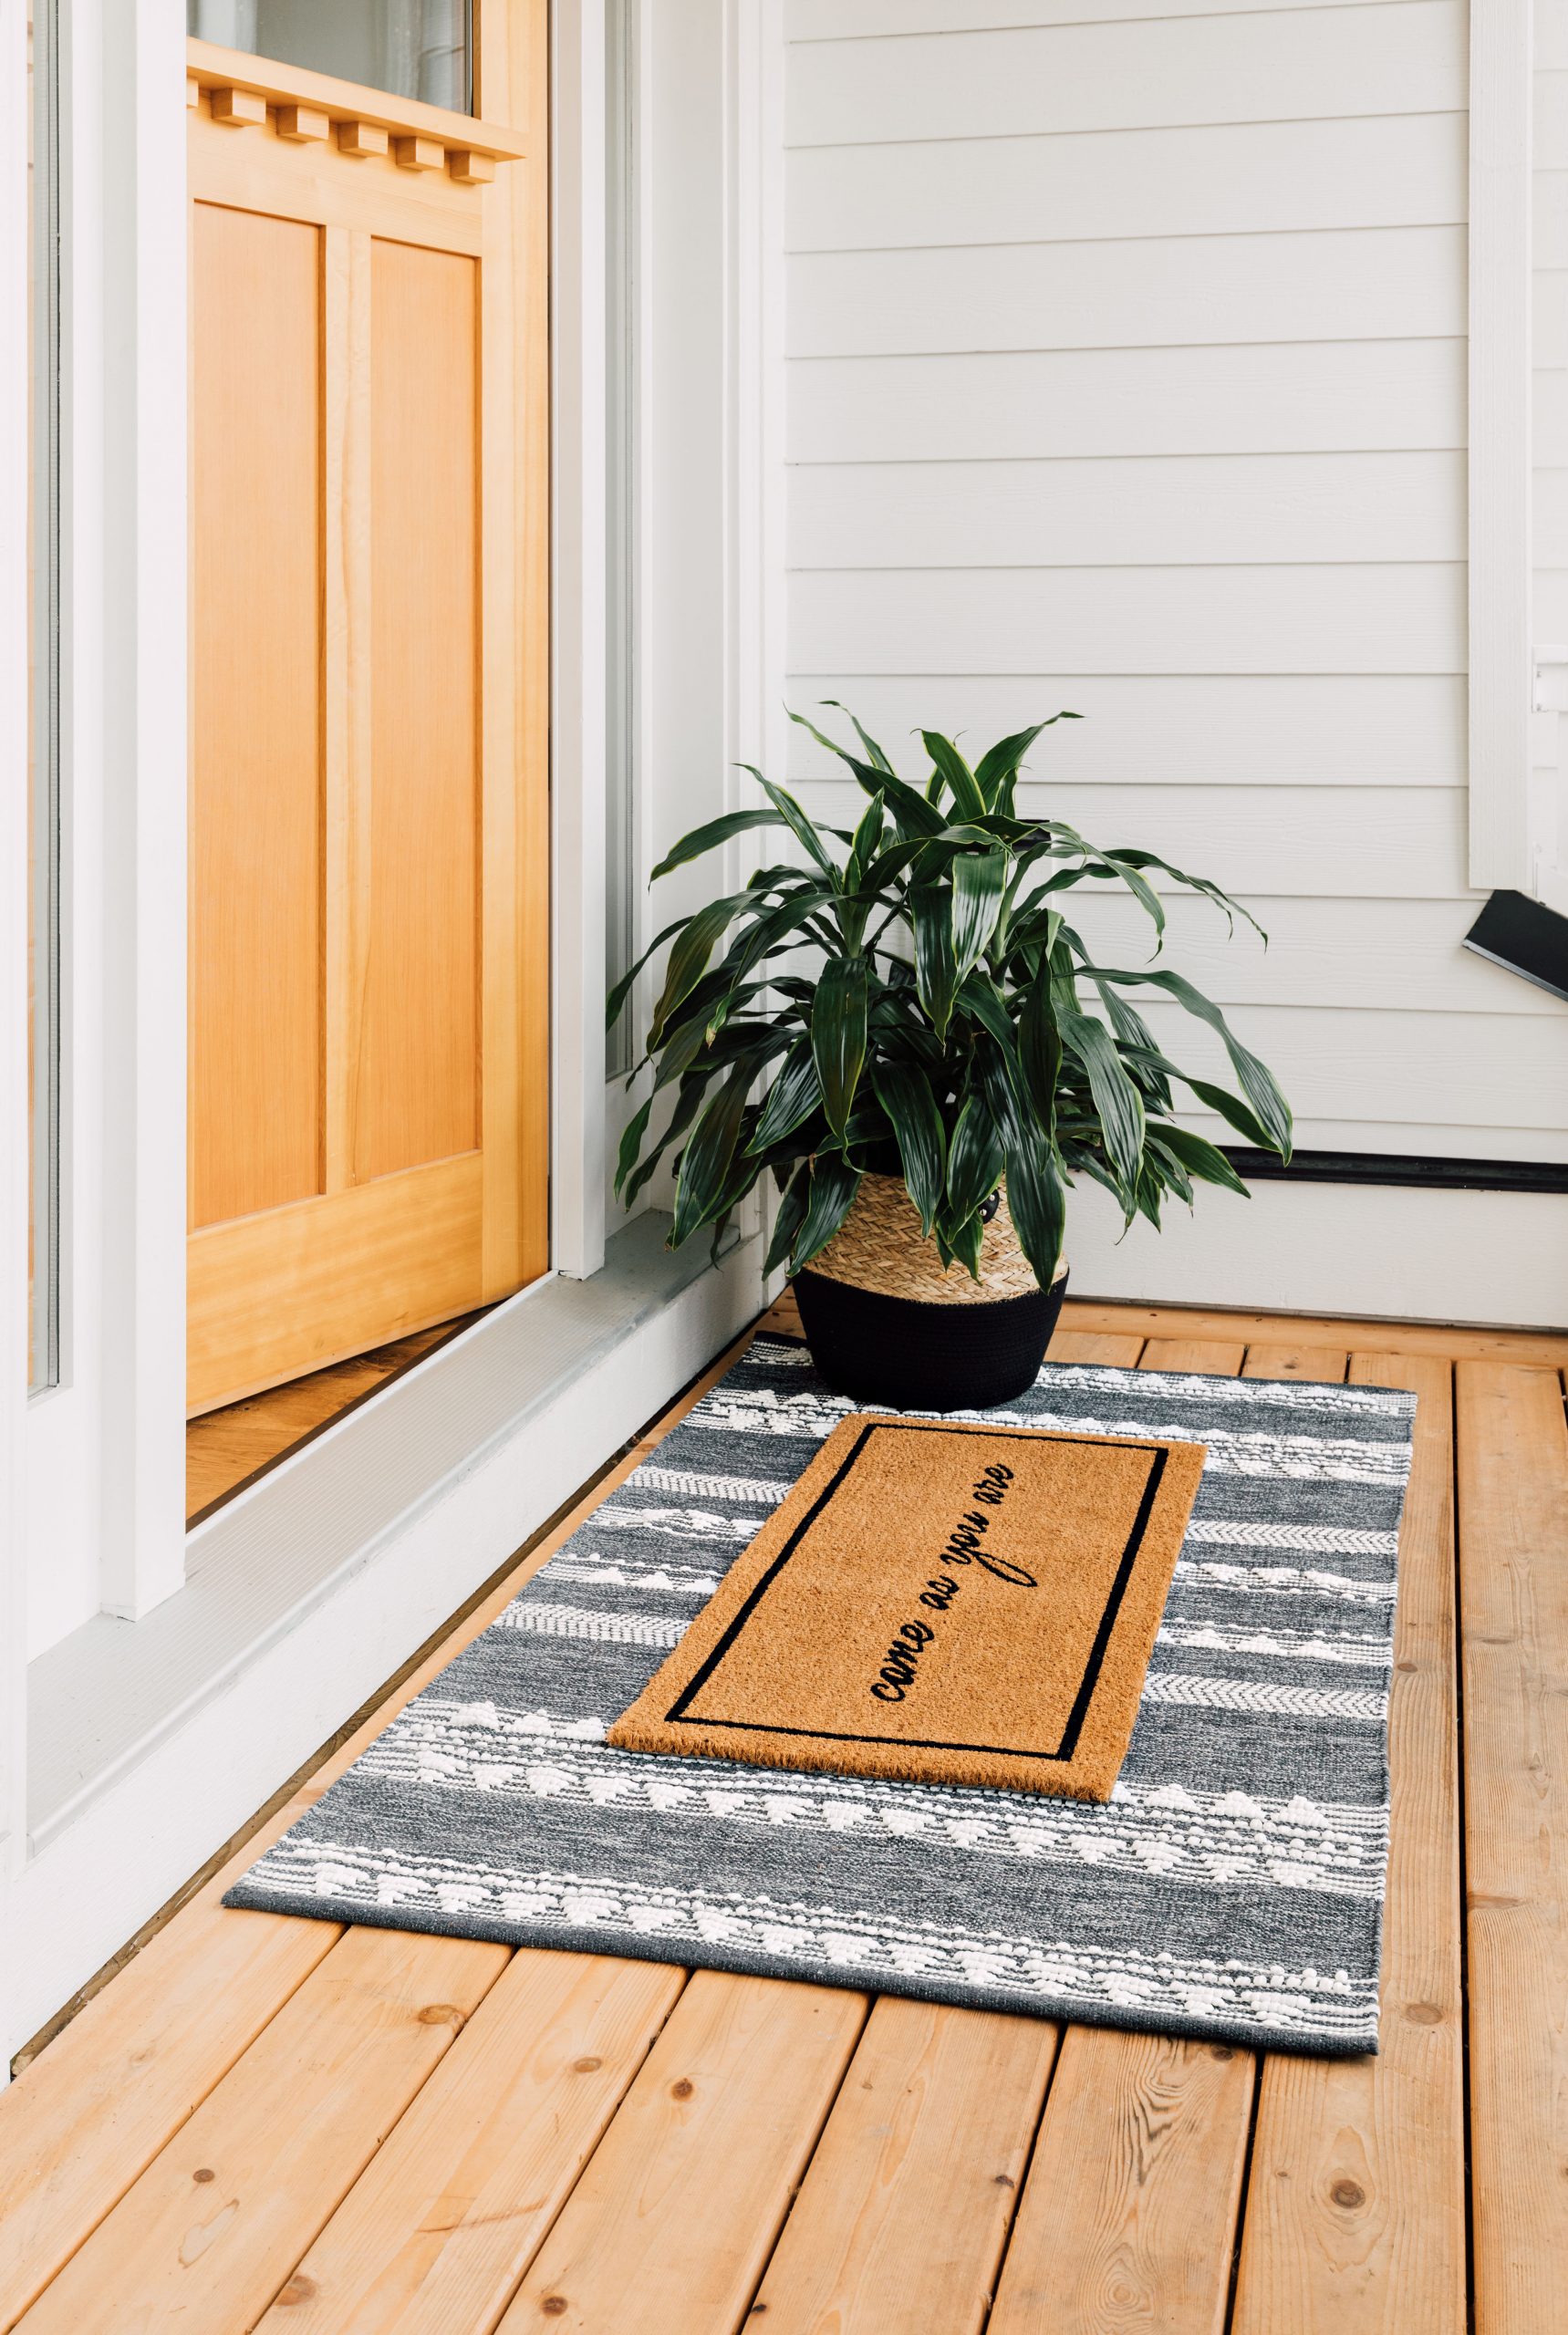 Two mats on a front porch create a welcoming atmosphere